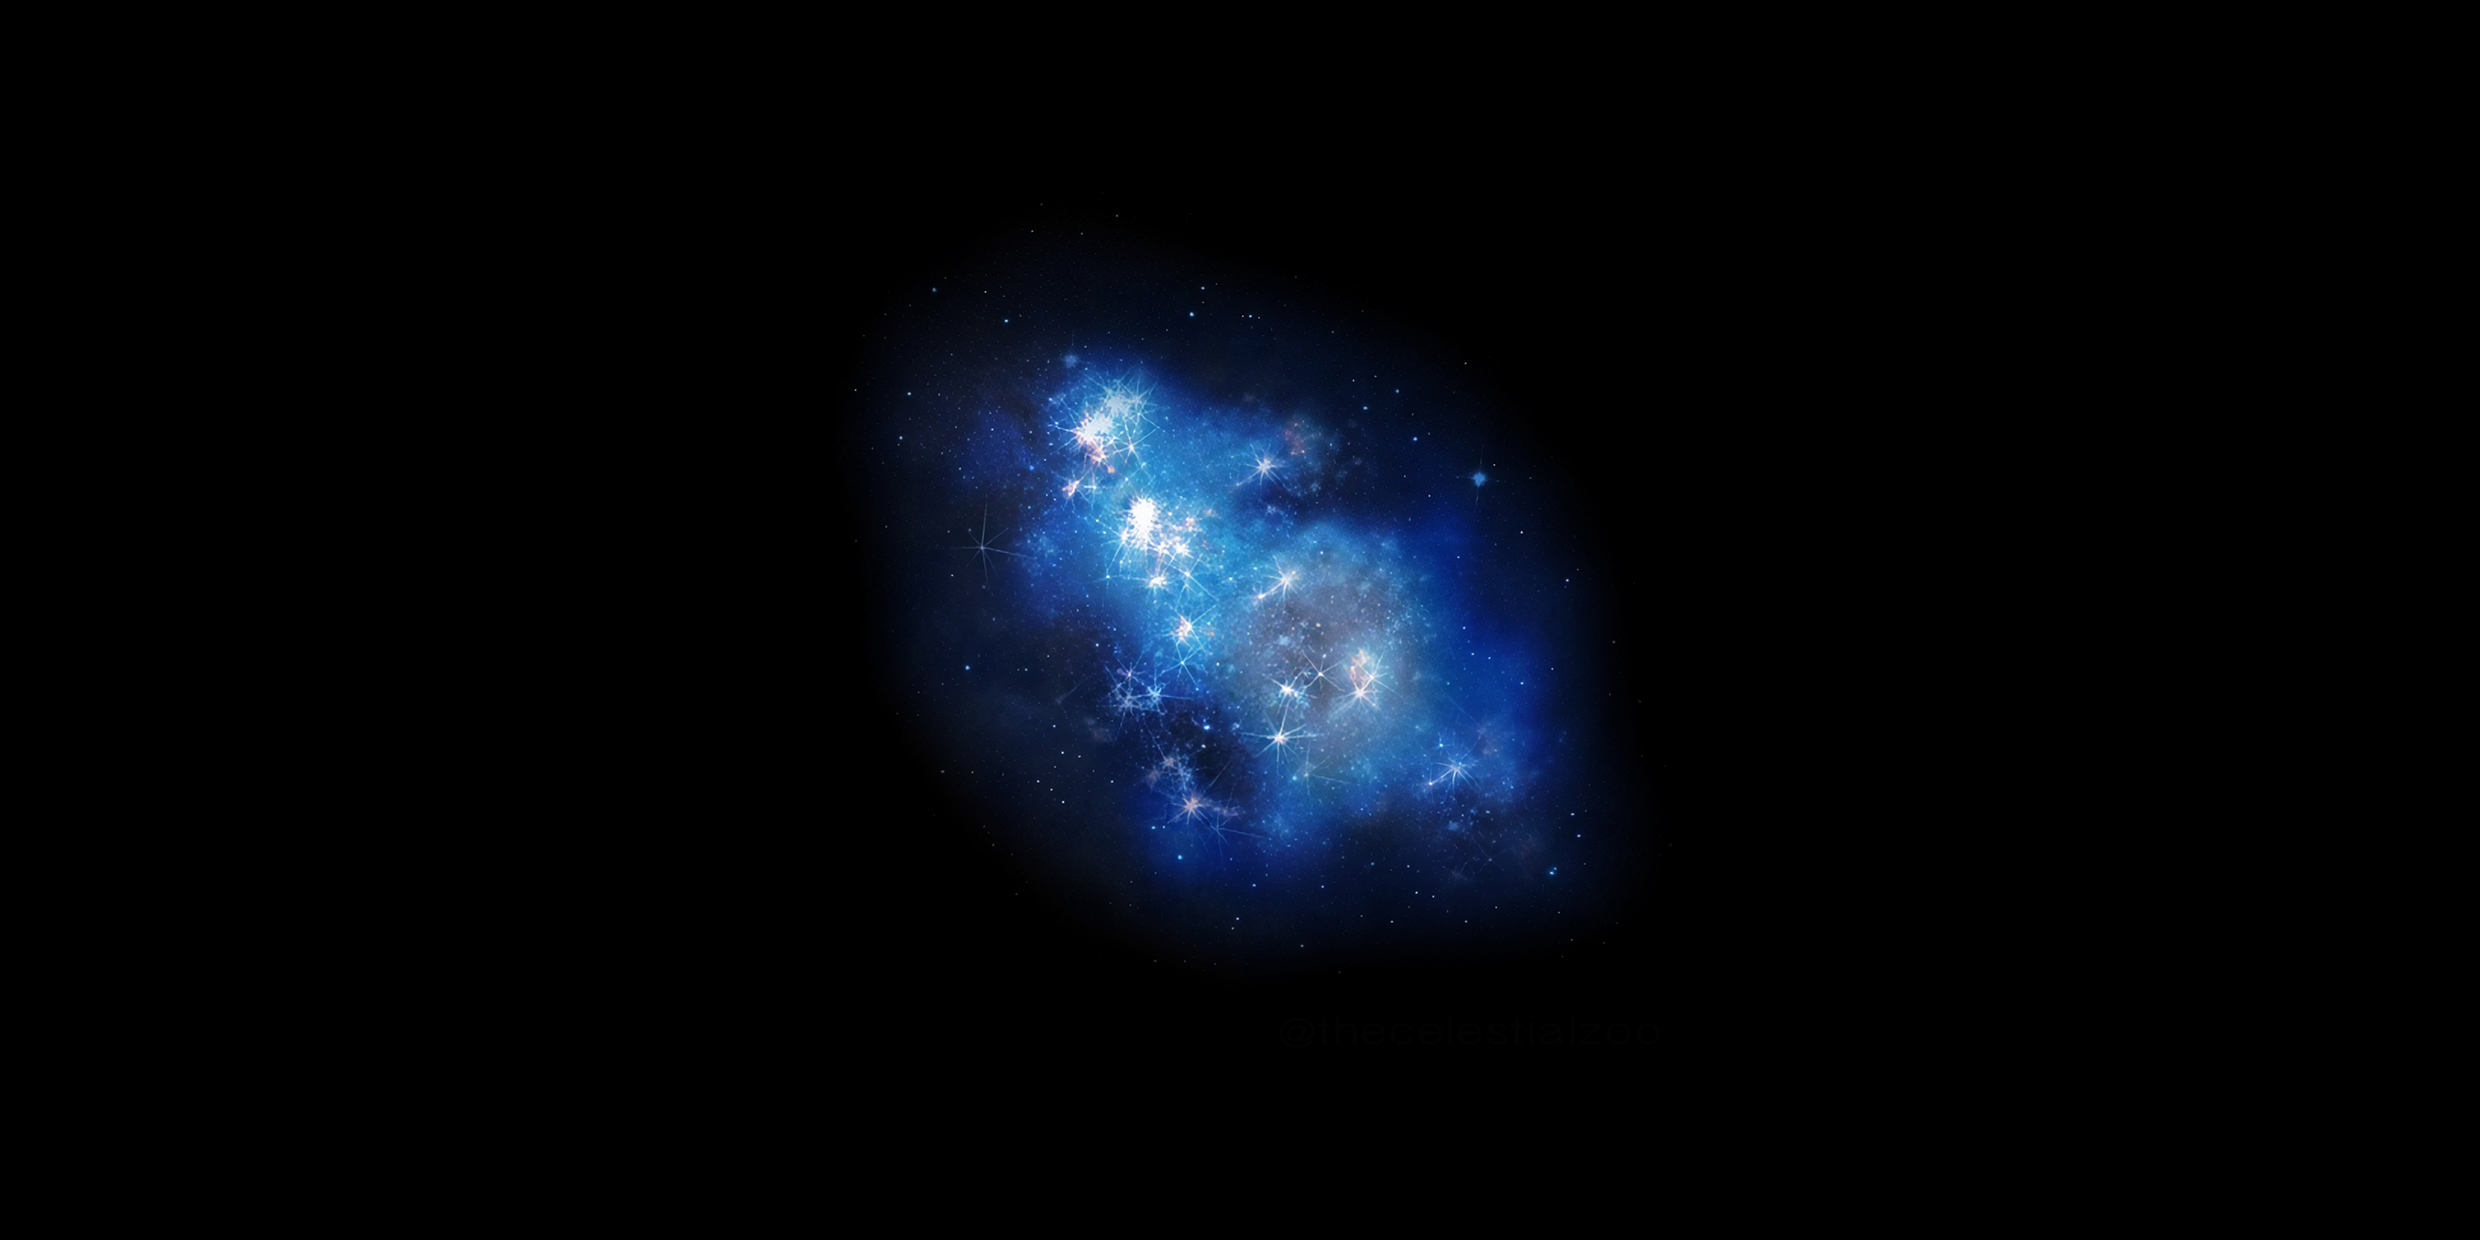 Arist's impression of a galaxy in the early universe